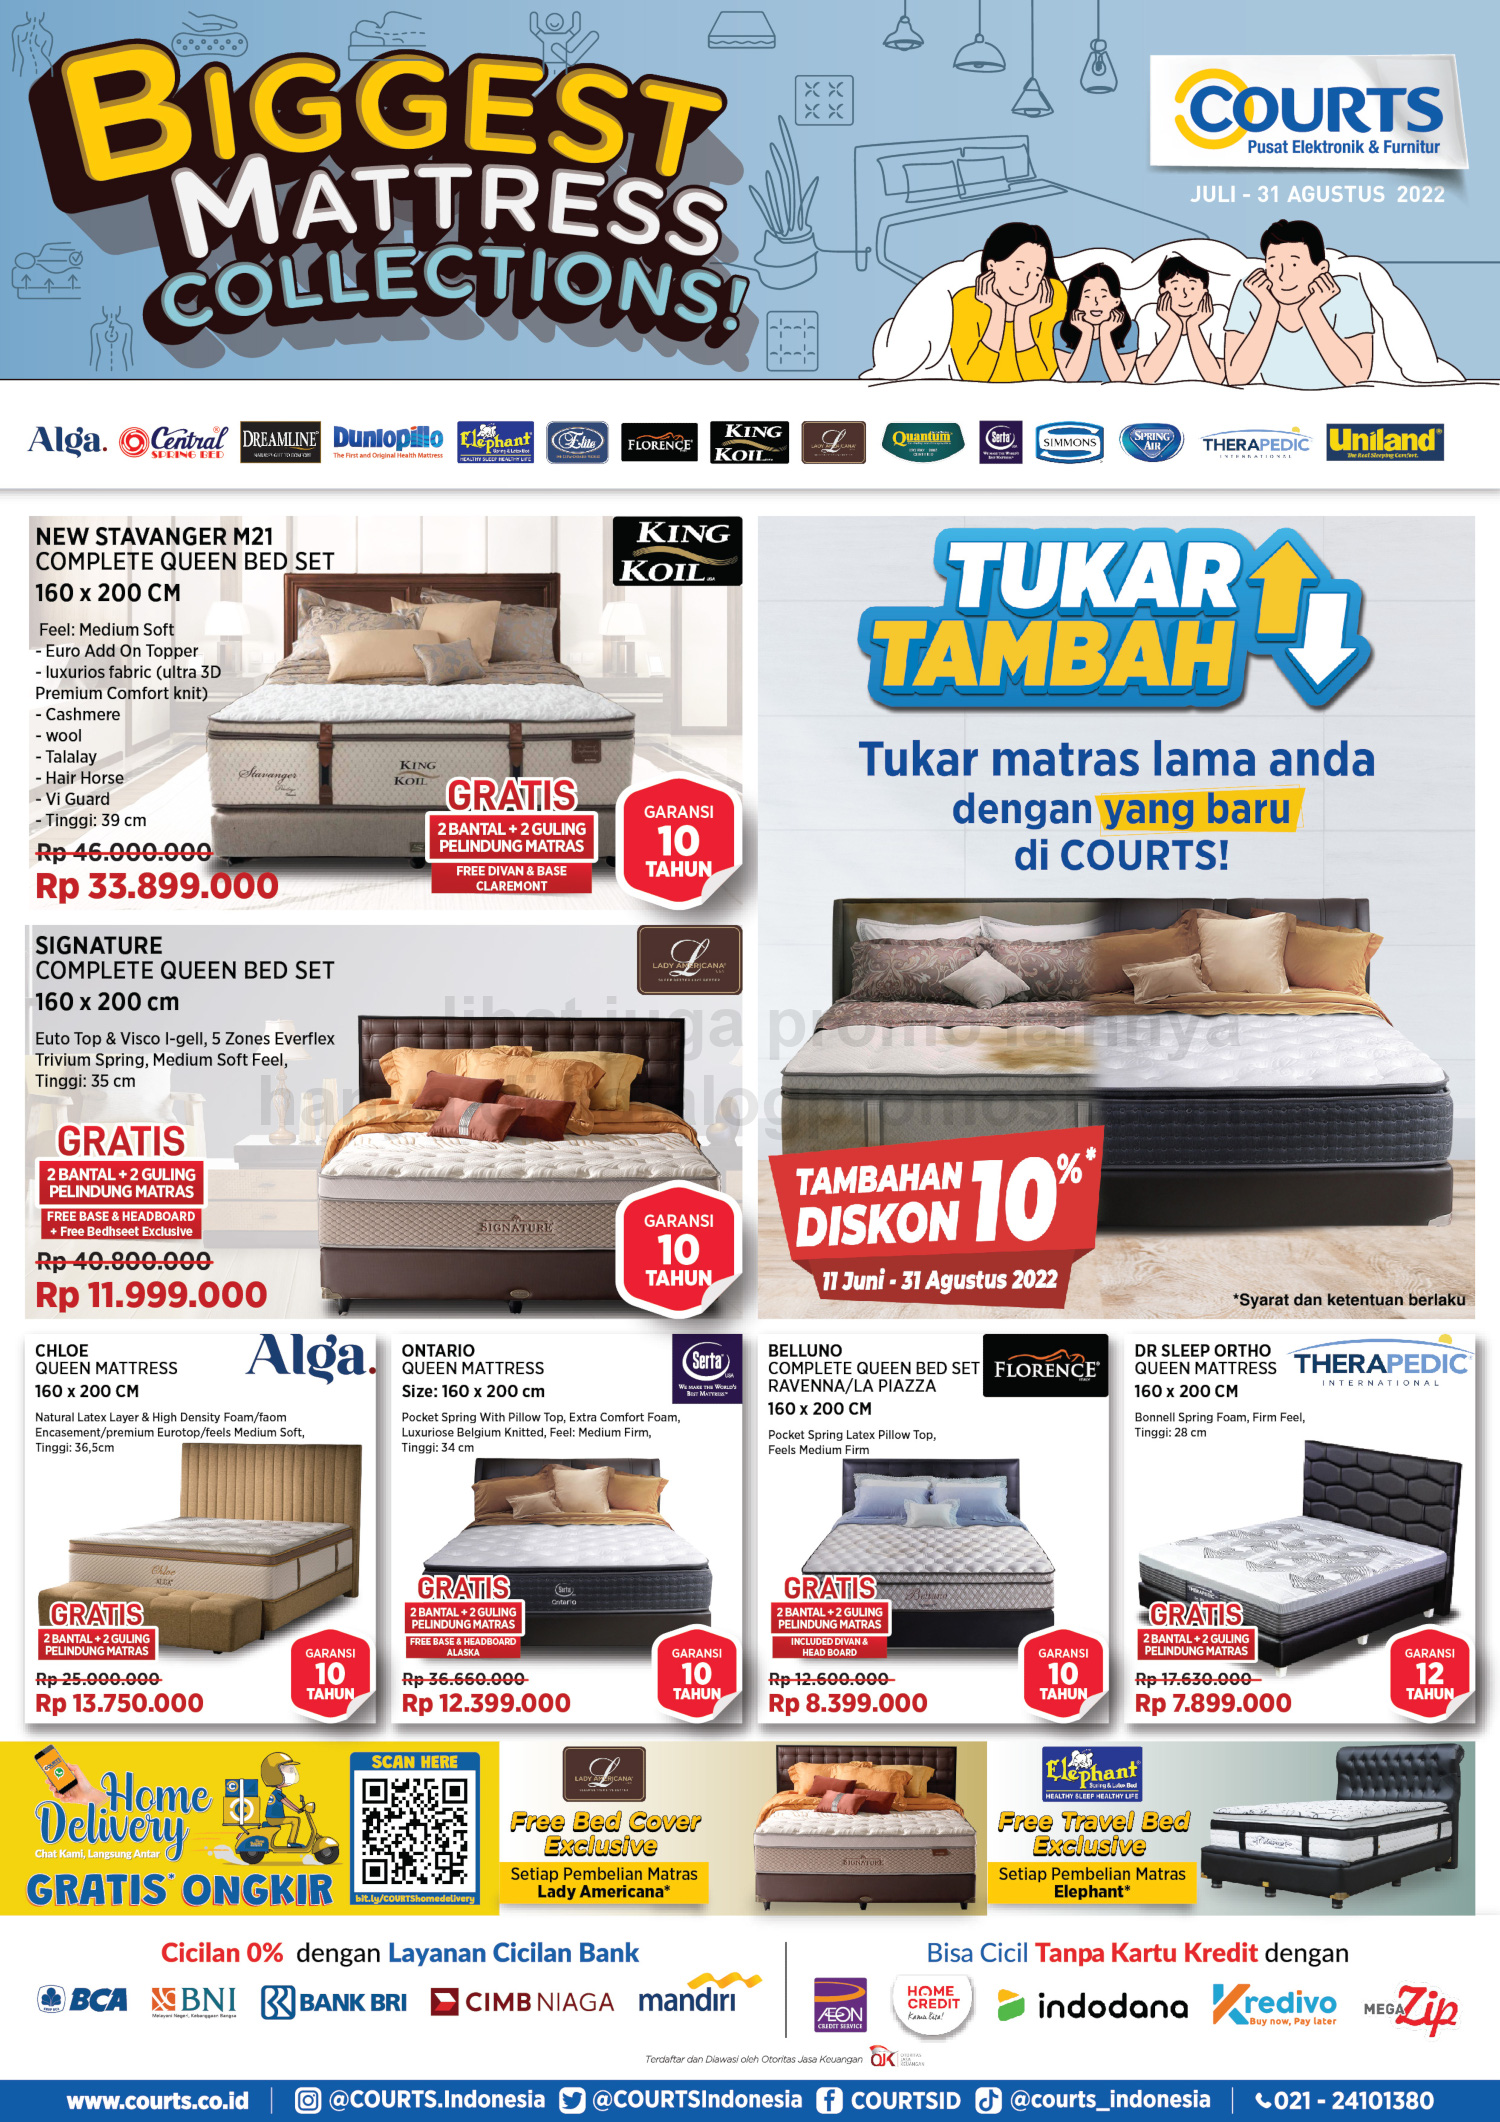 Promo COURTS SPECIAL PRICE untuk BIGGEST MATTRESS COLLECTION 